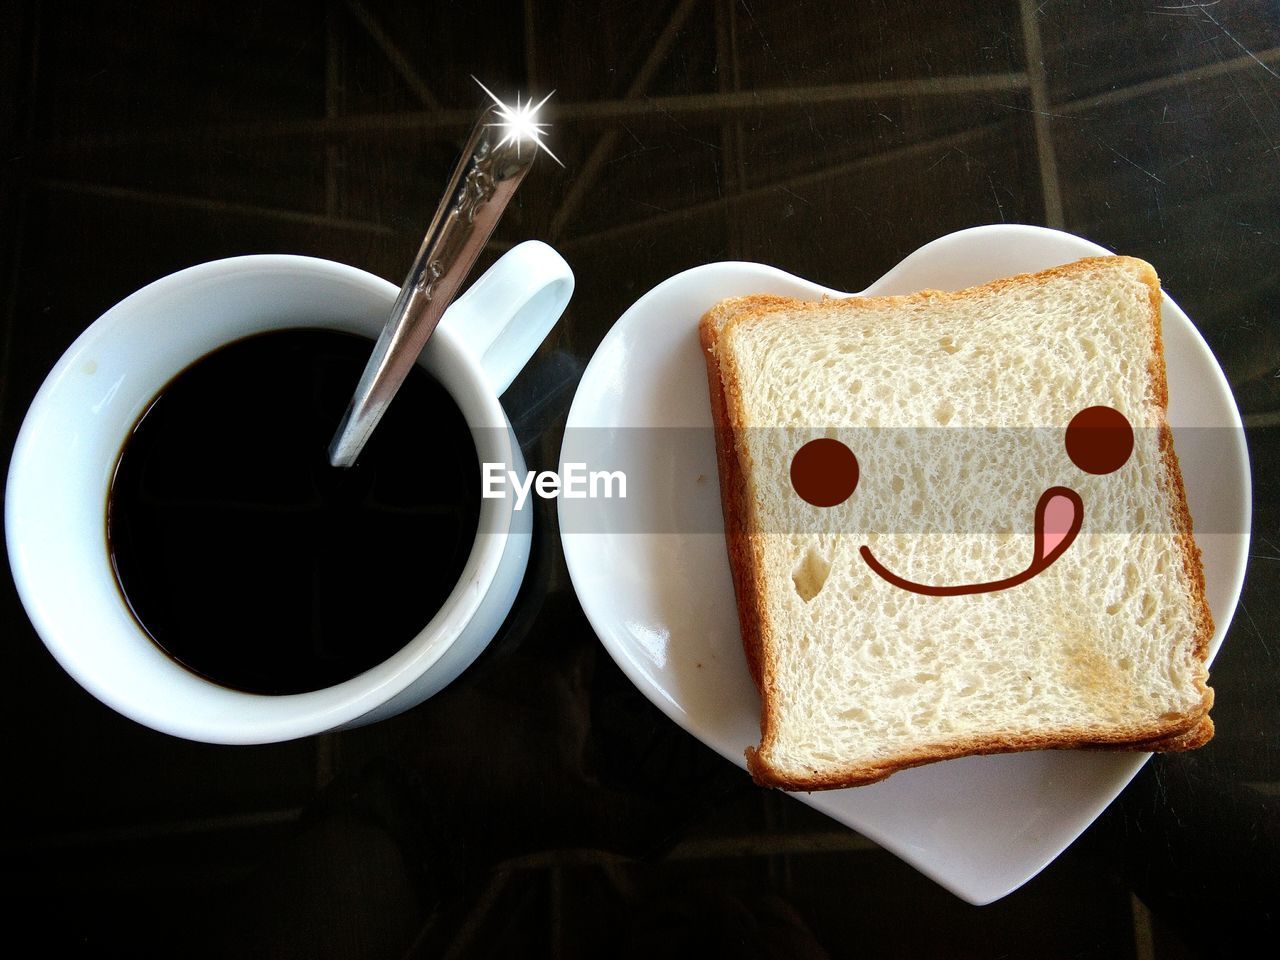 Close-up of coffee cup on table with bread